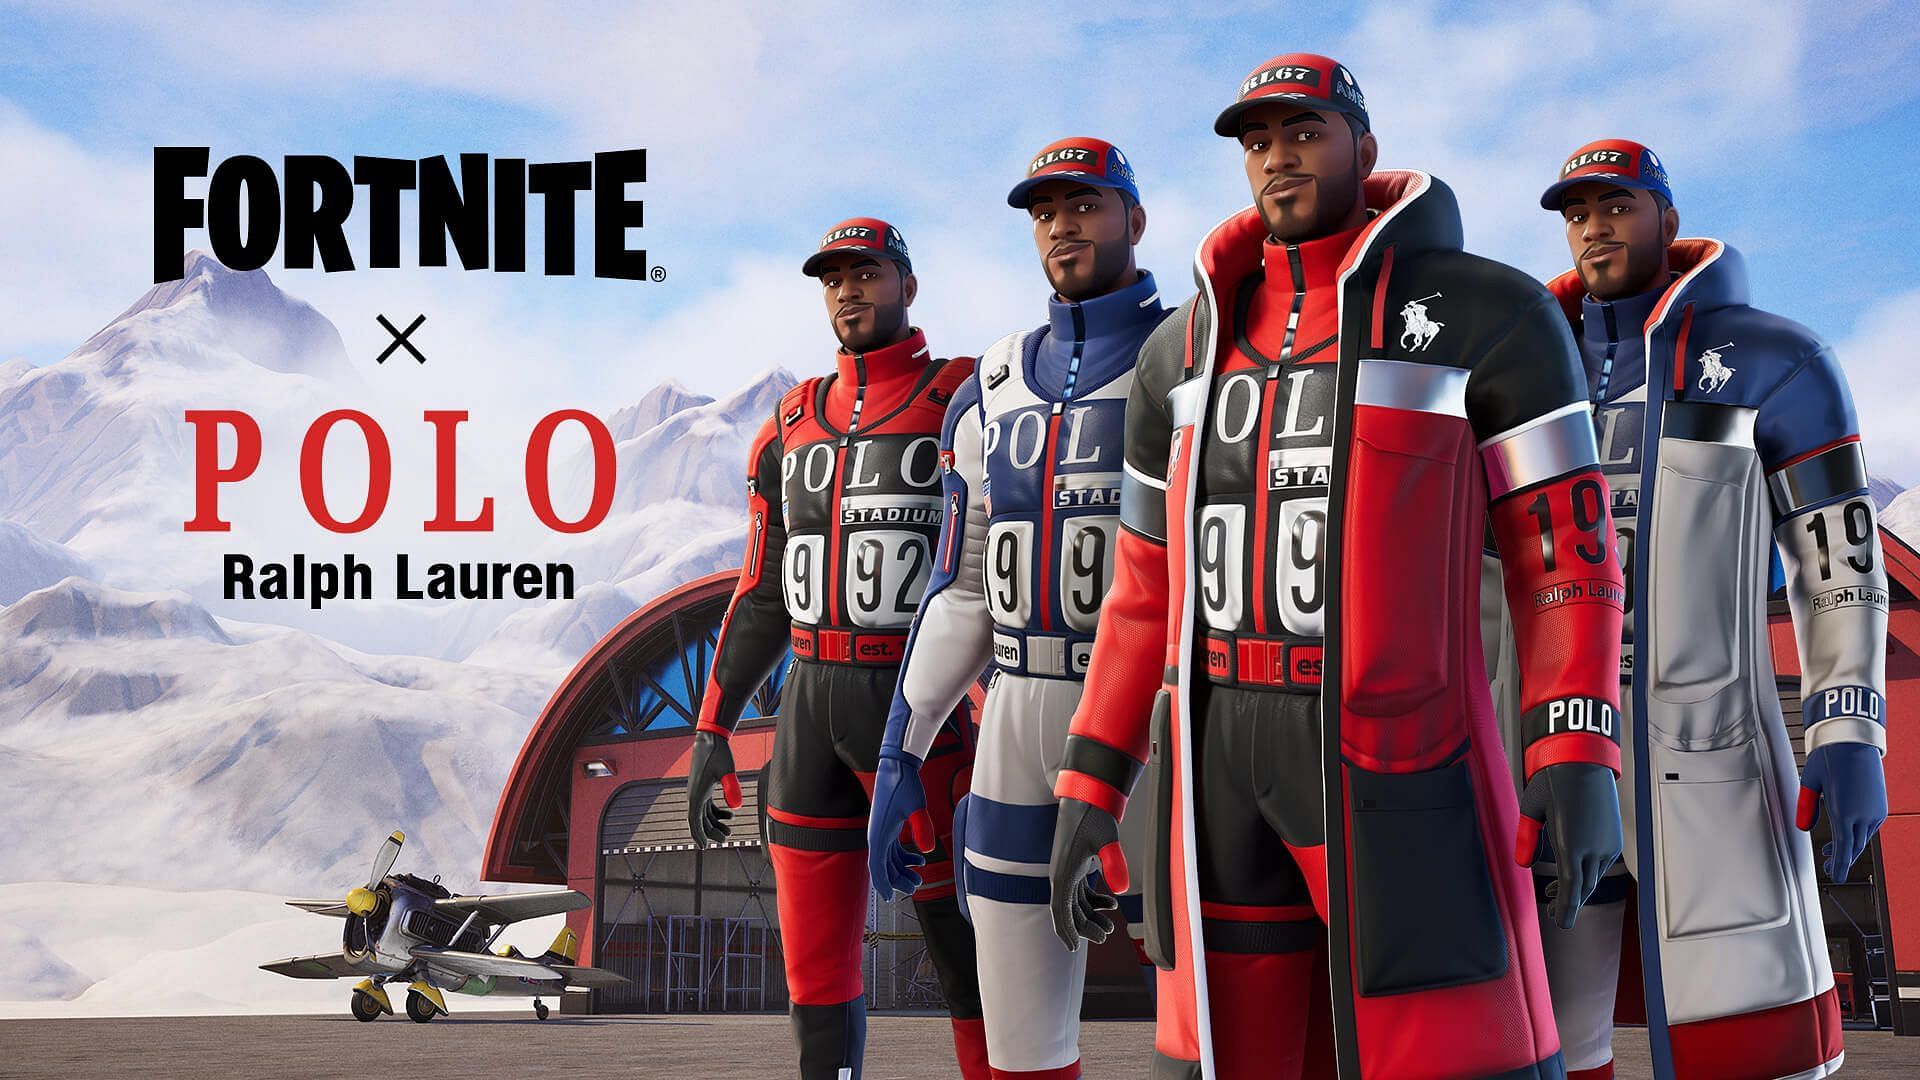 The Stadium Hero skin comes with the Fortnite x Polo collaboration (Image via Epic Games)